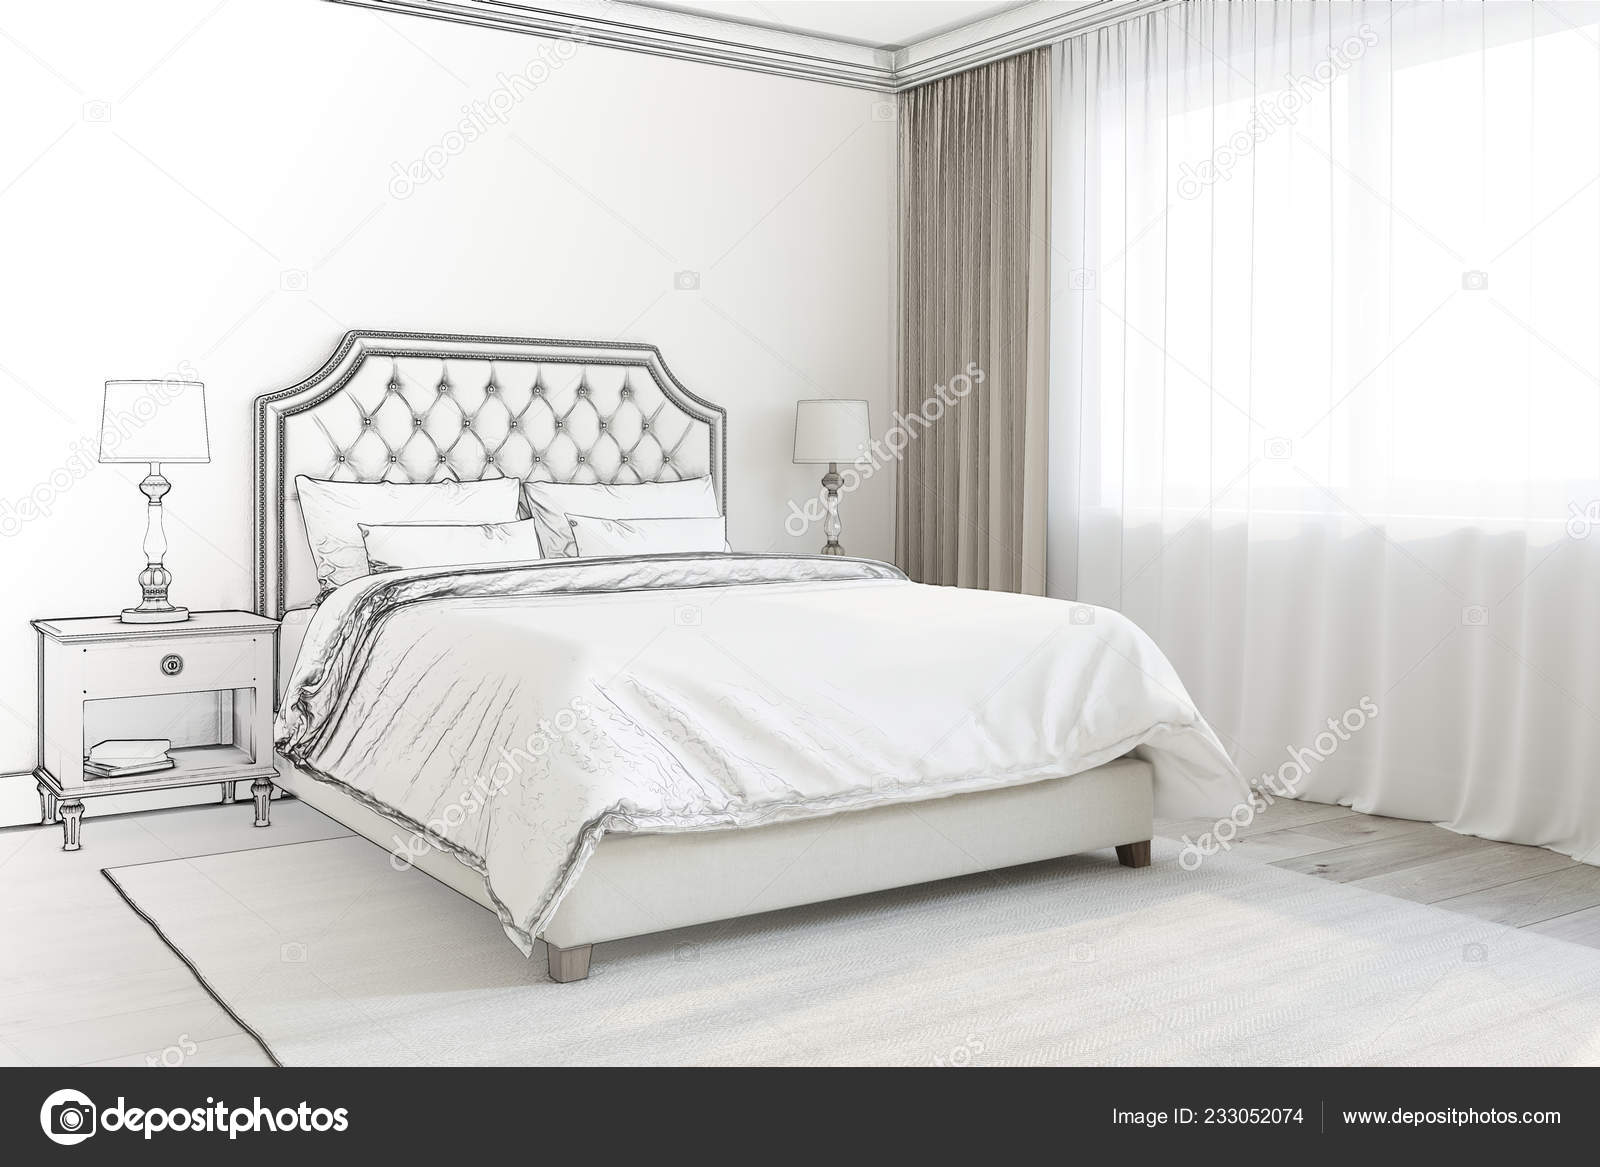 Illustration Sketch Bedroom Become Real Interior Stock